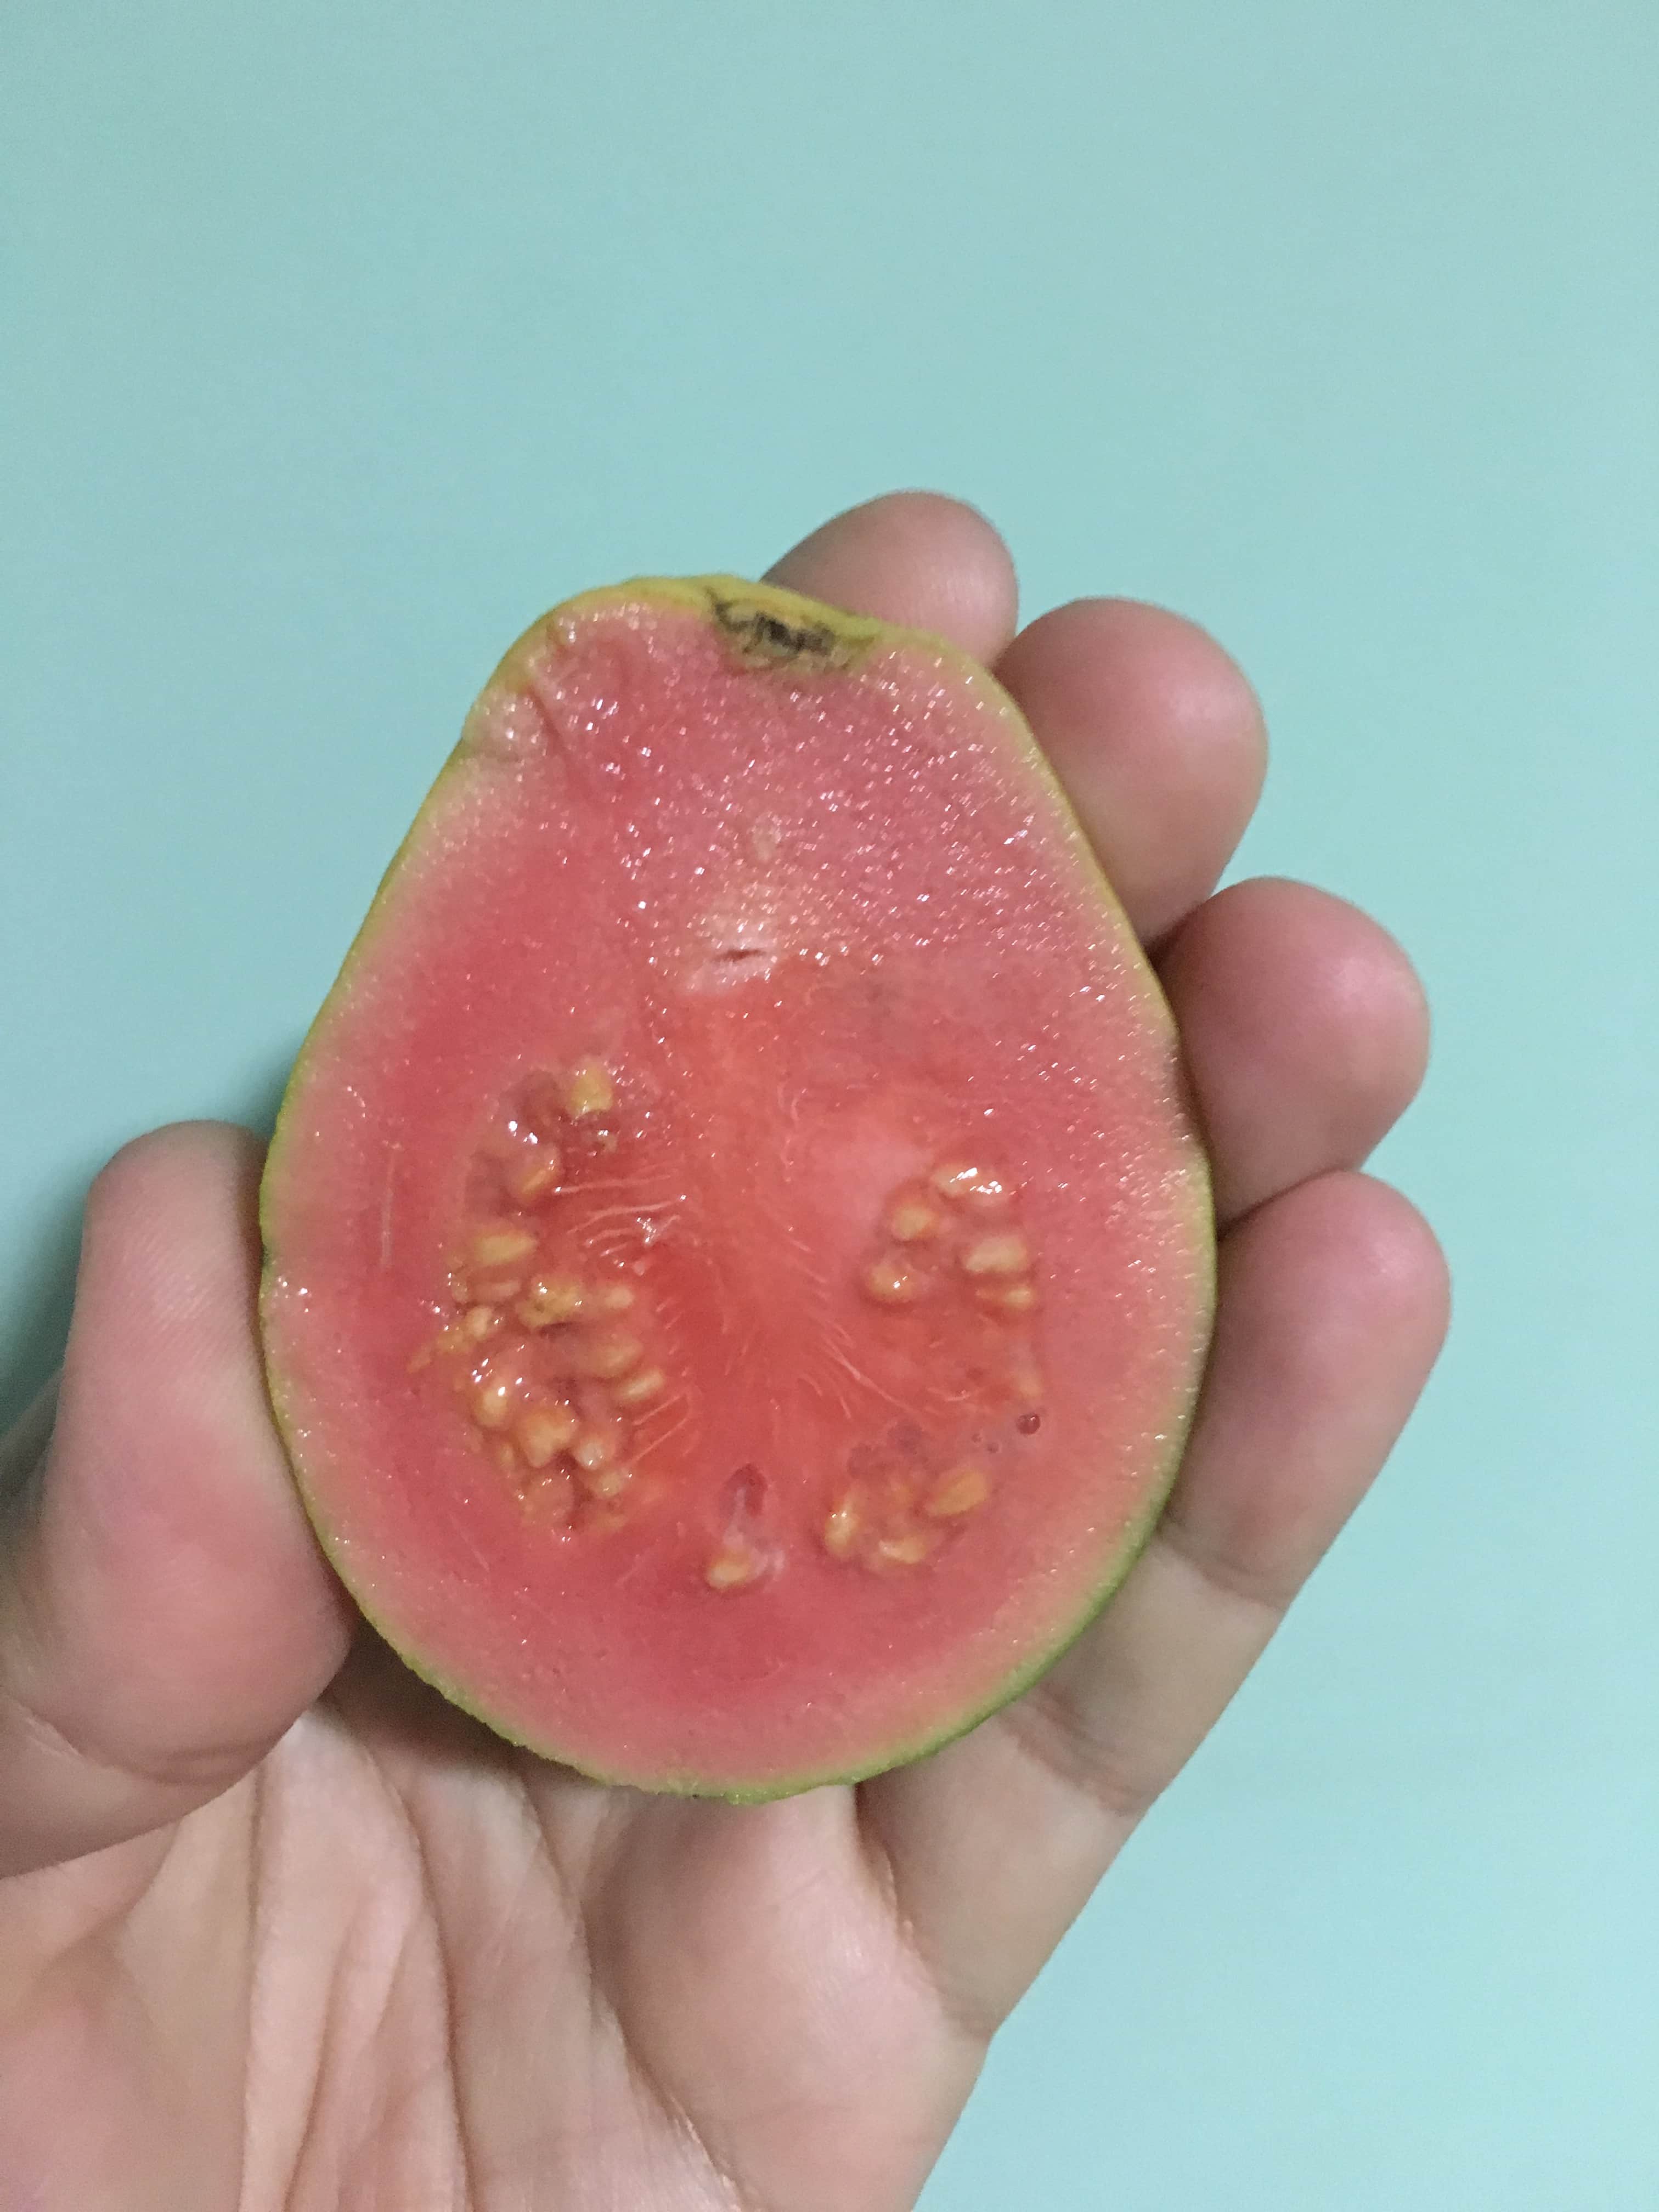 Guava Fruit in Colombia